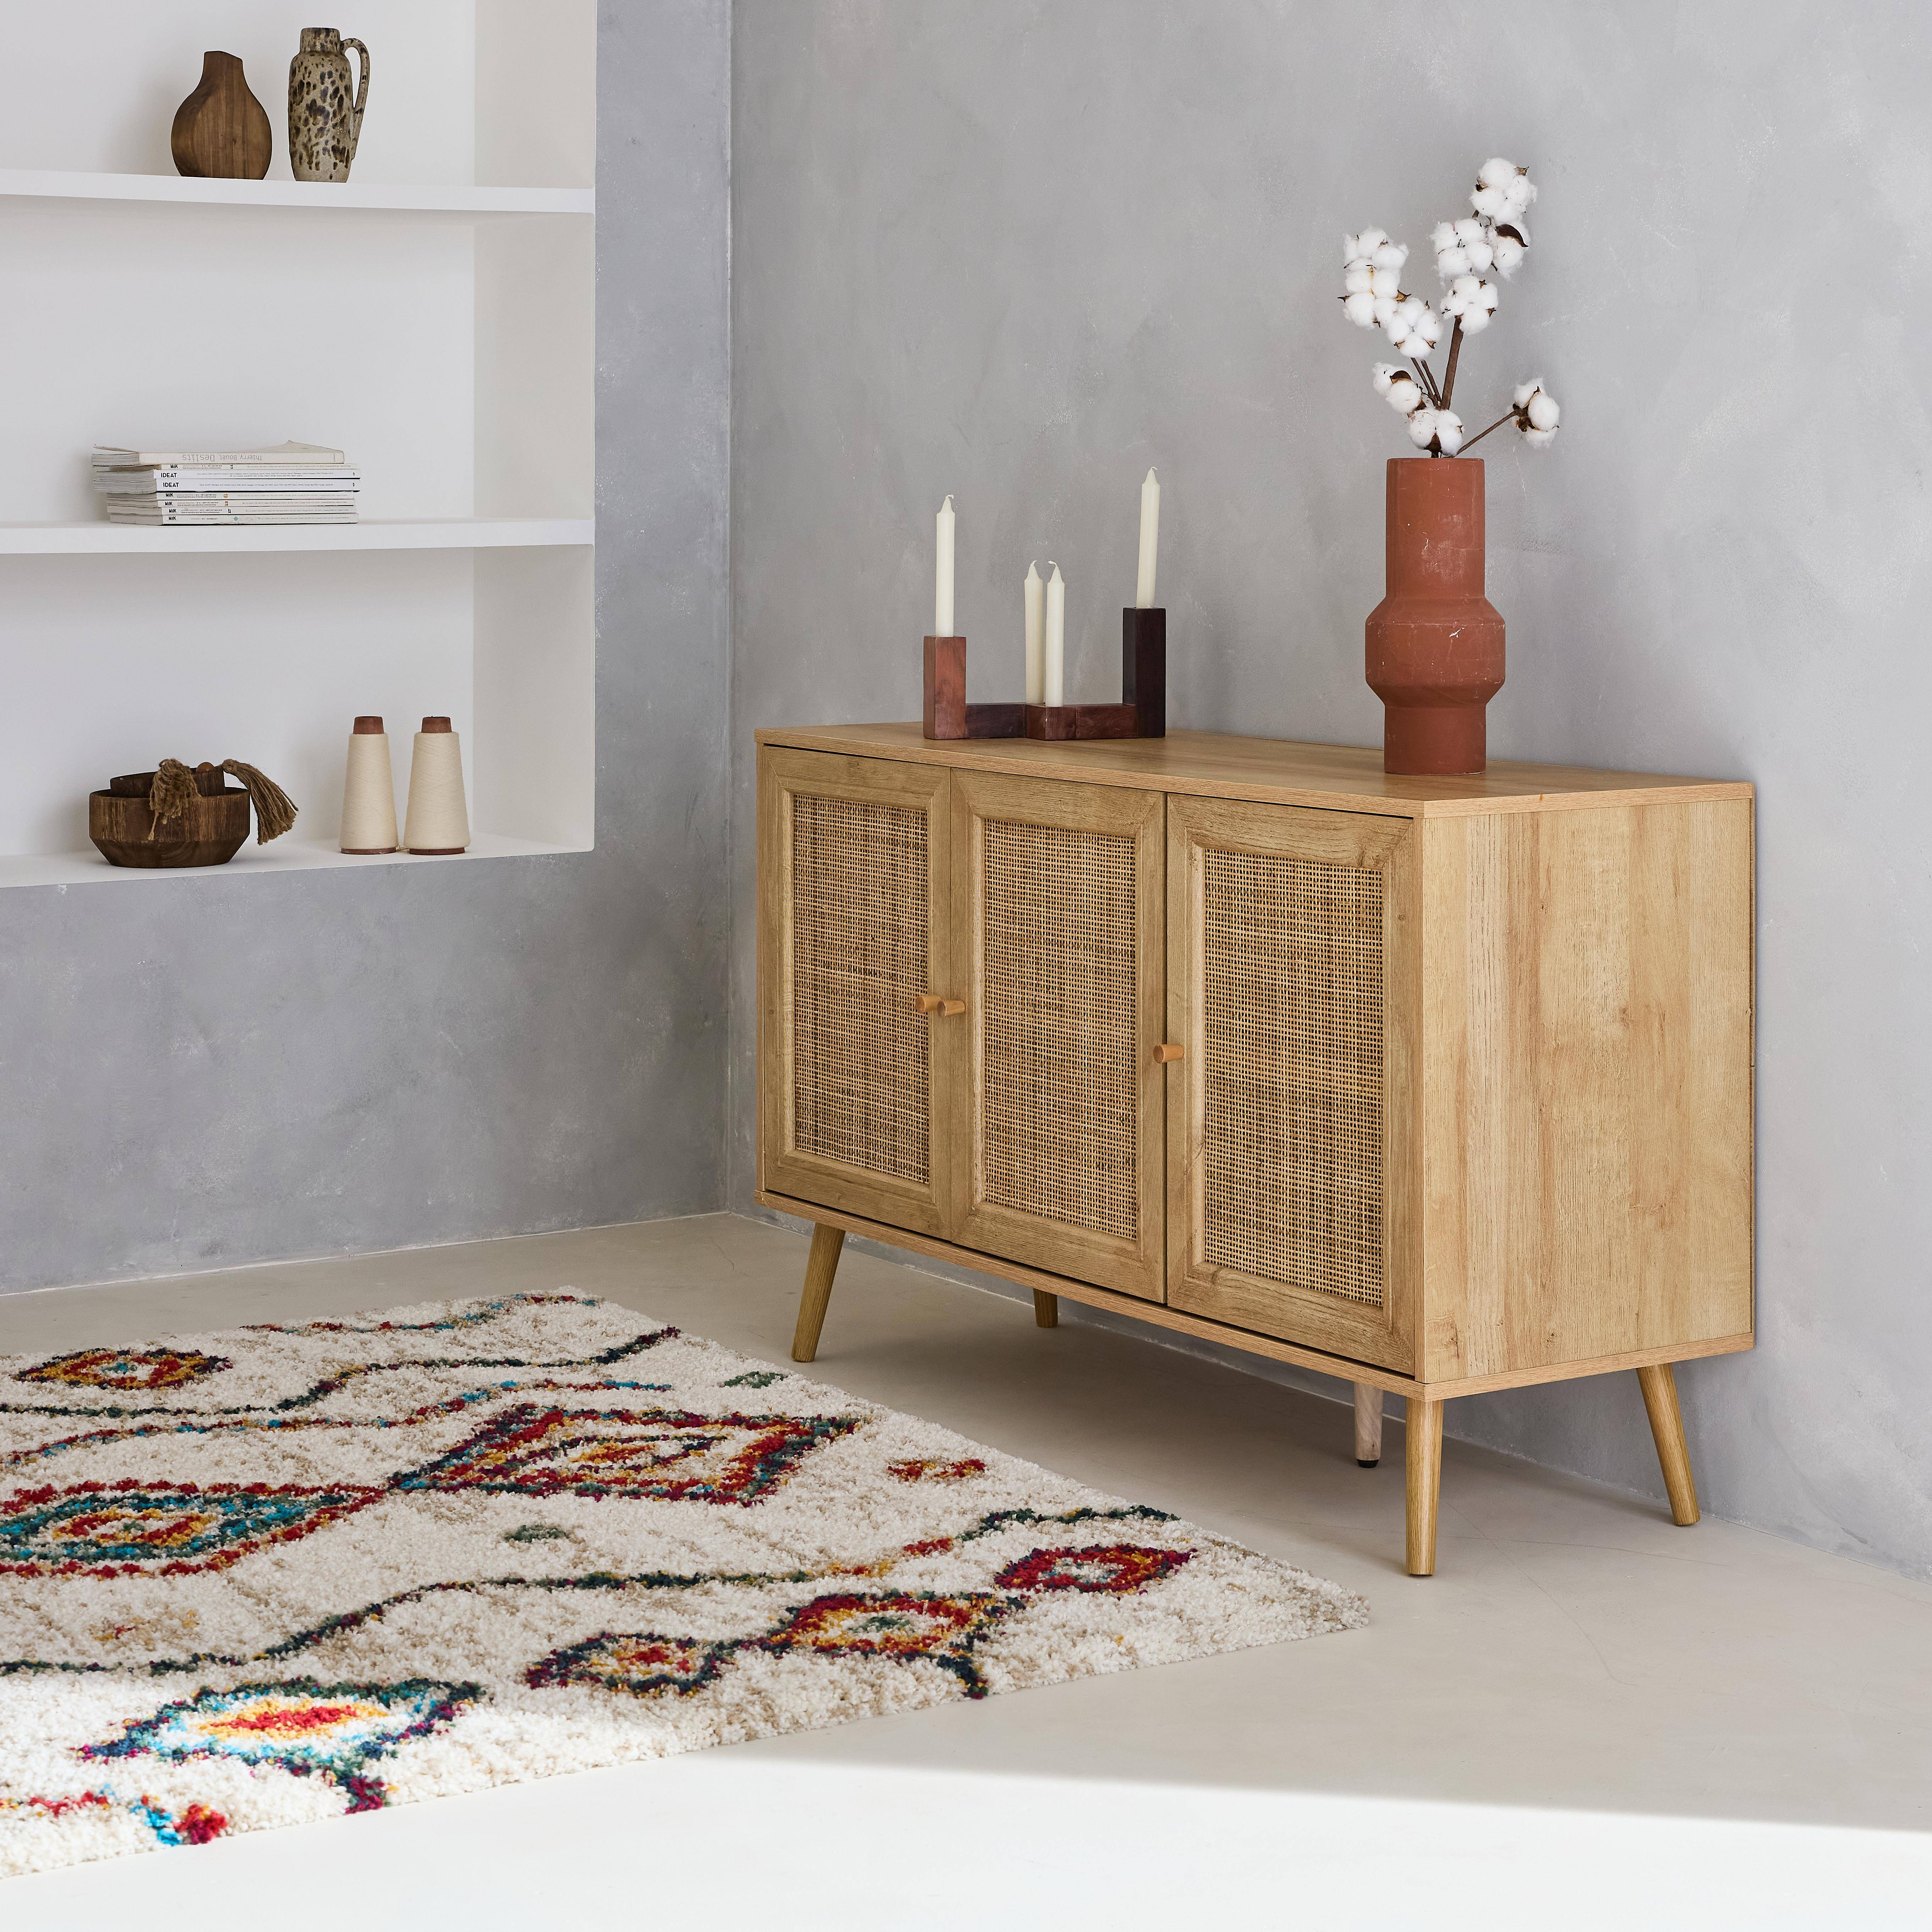 Wooden and cane rattan detail sideboard with 3 doors, 2 shelves, Scandi-style legs, 120x39x70cm - Boheme - Natural wood colour,sweeek,Photo2